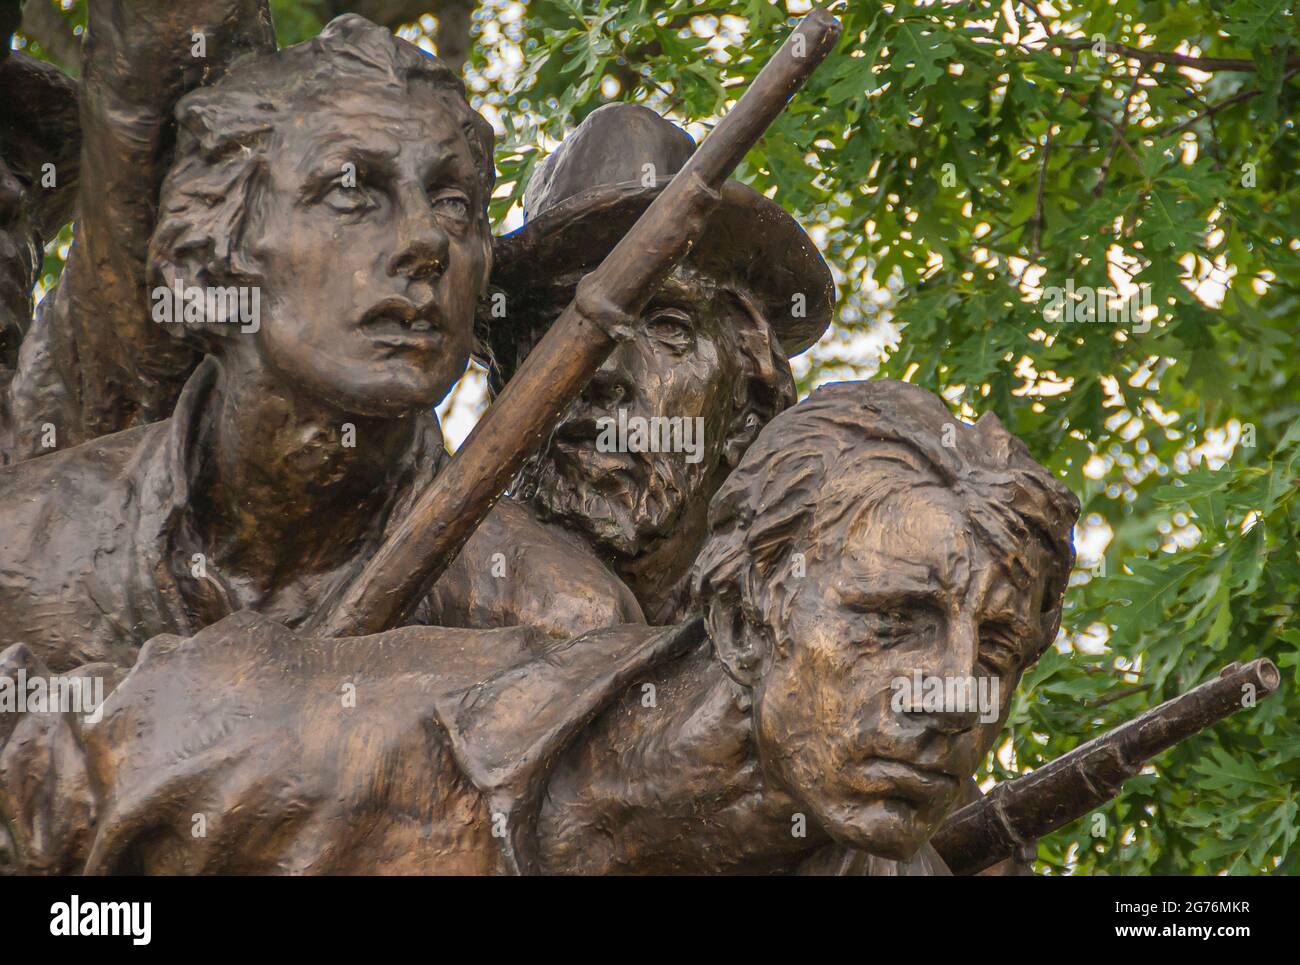 Gettysburg, PA, USA - June 14, 2008: Battlefield monuments. Closeup of detail of the North Carolina State monument showing 3 soldiers looking at the l Stock Photo